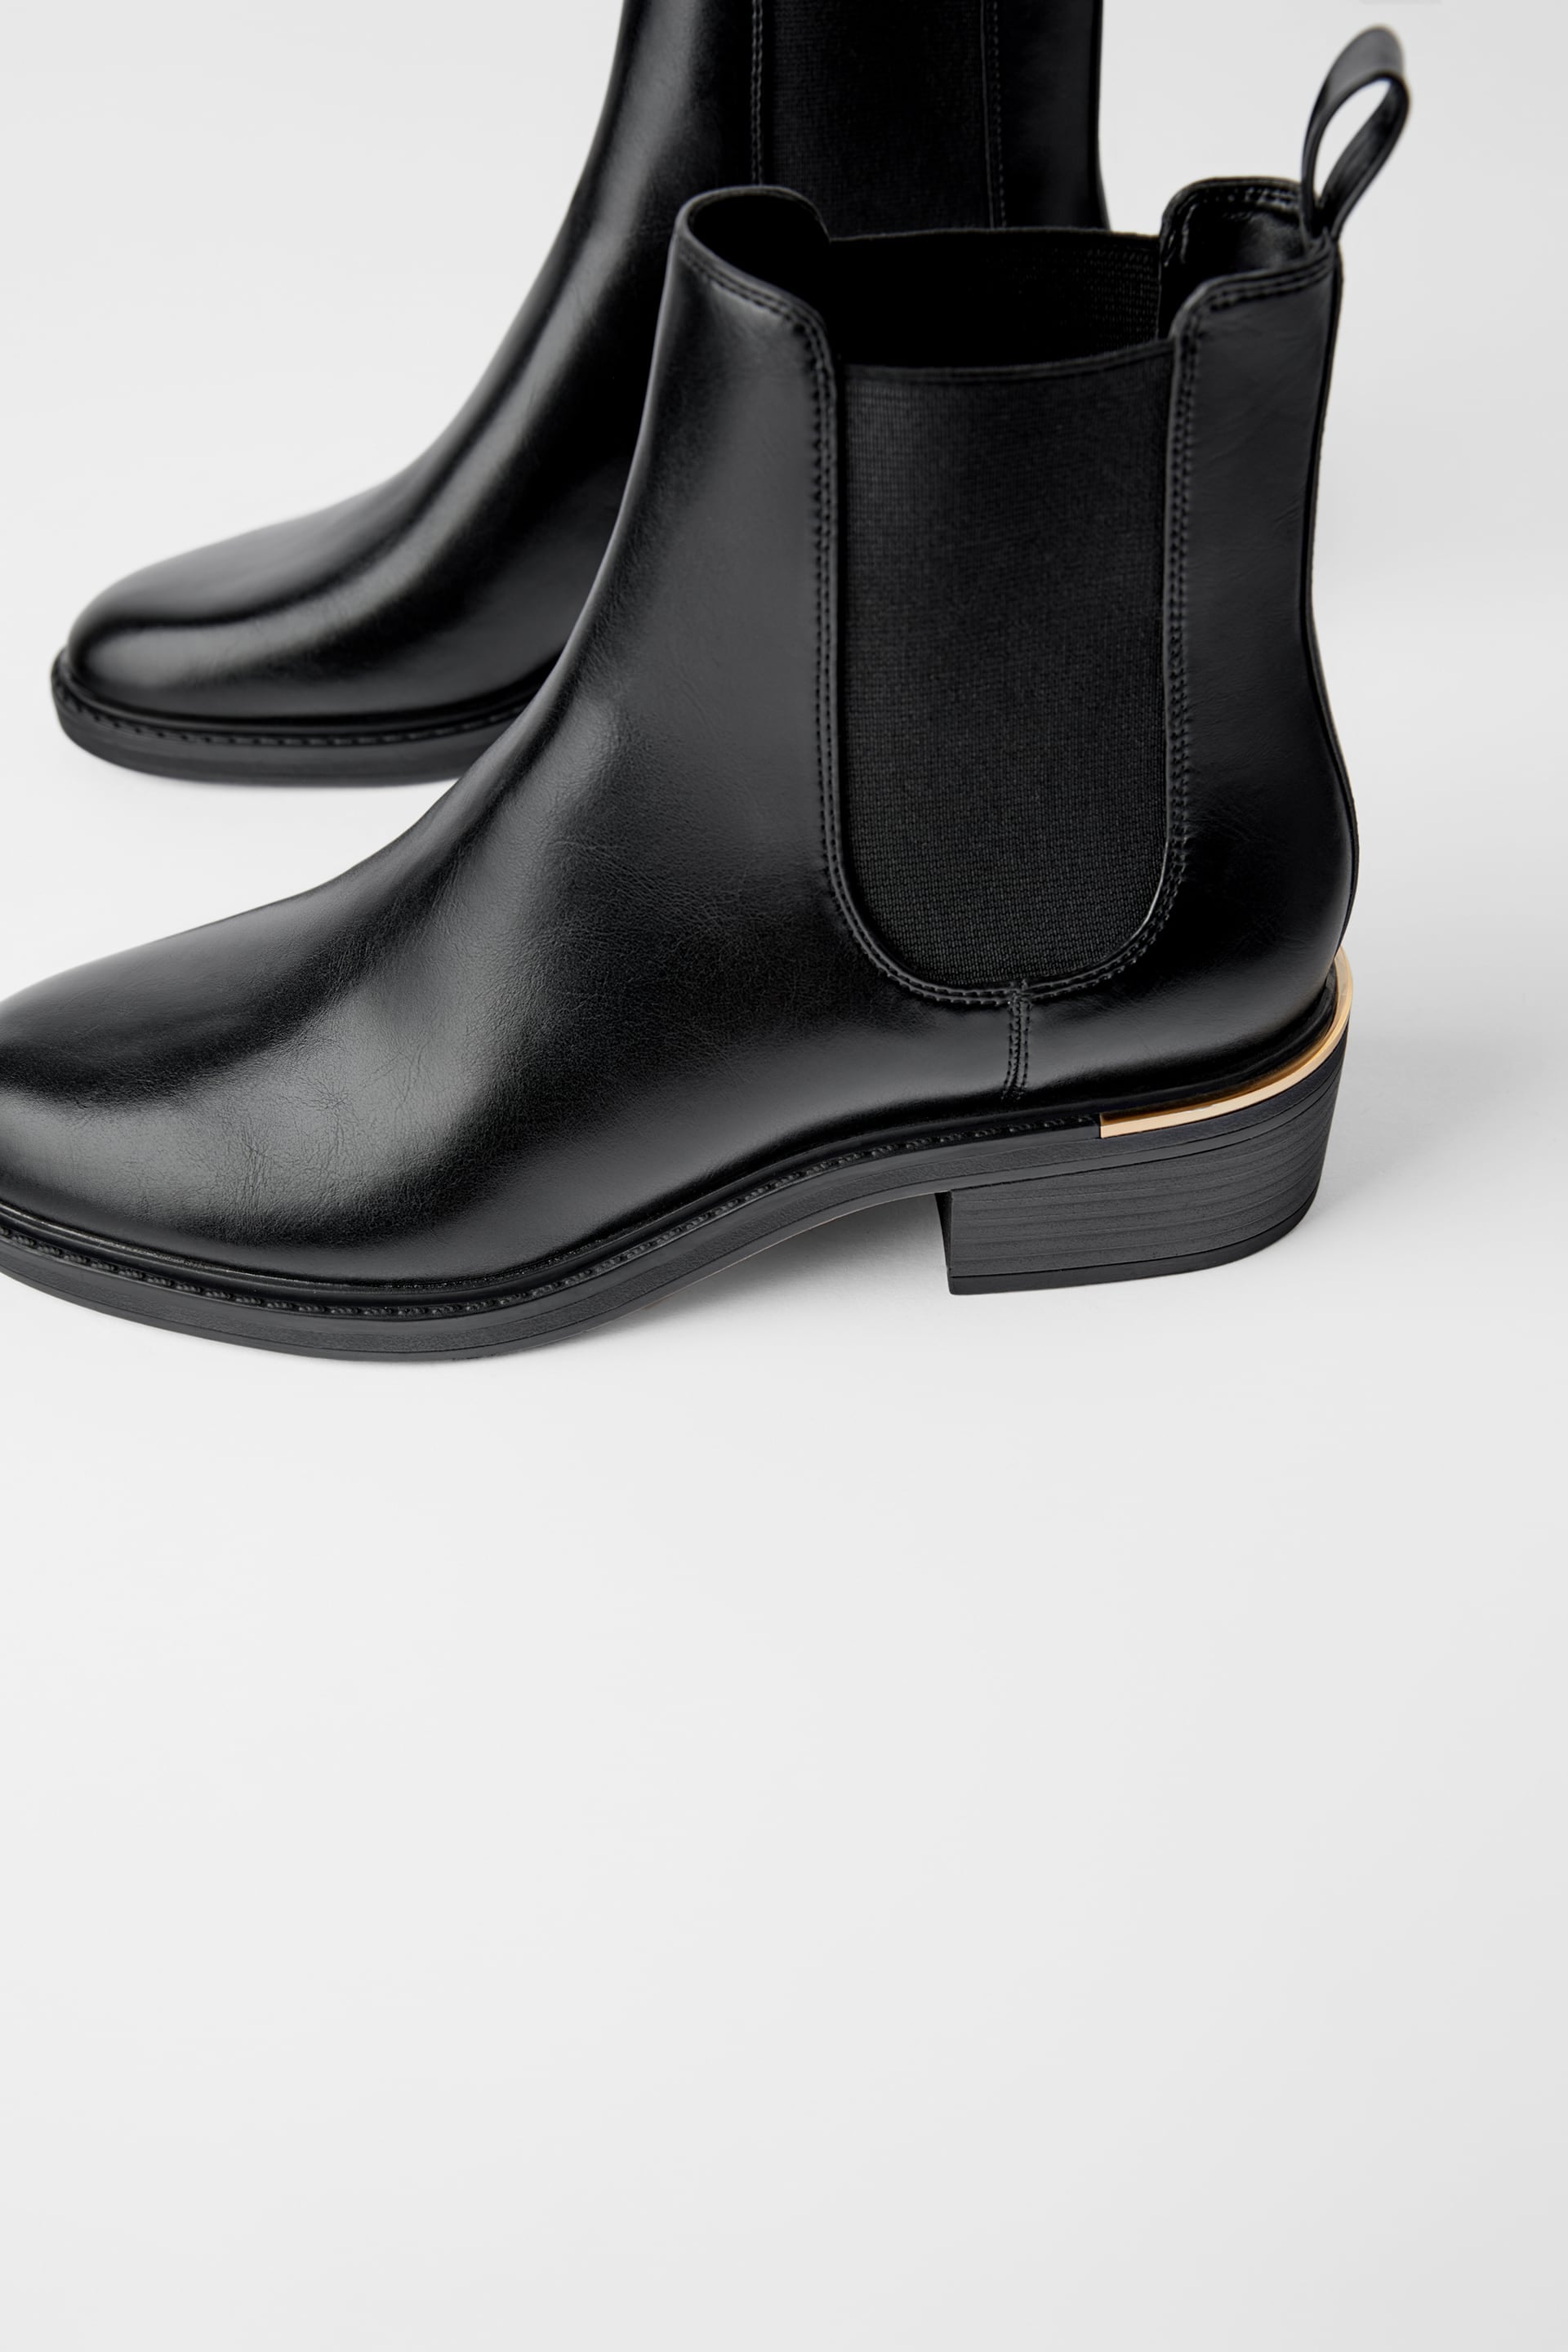 zara ankle boots